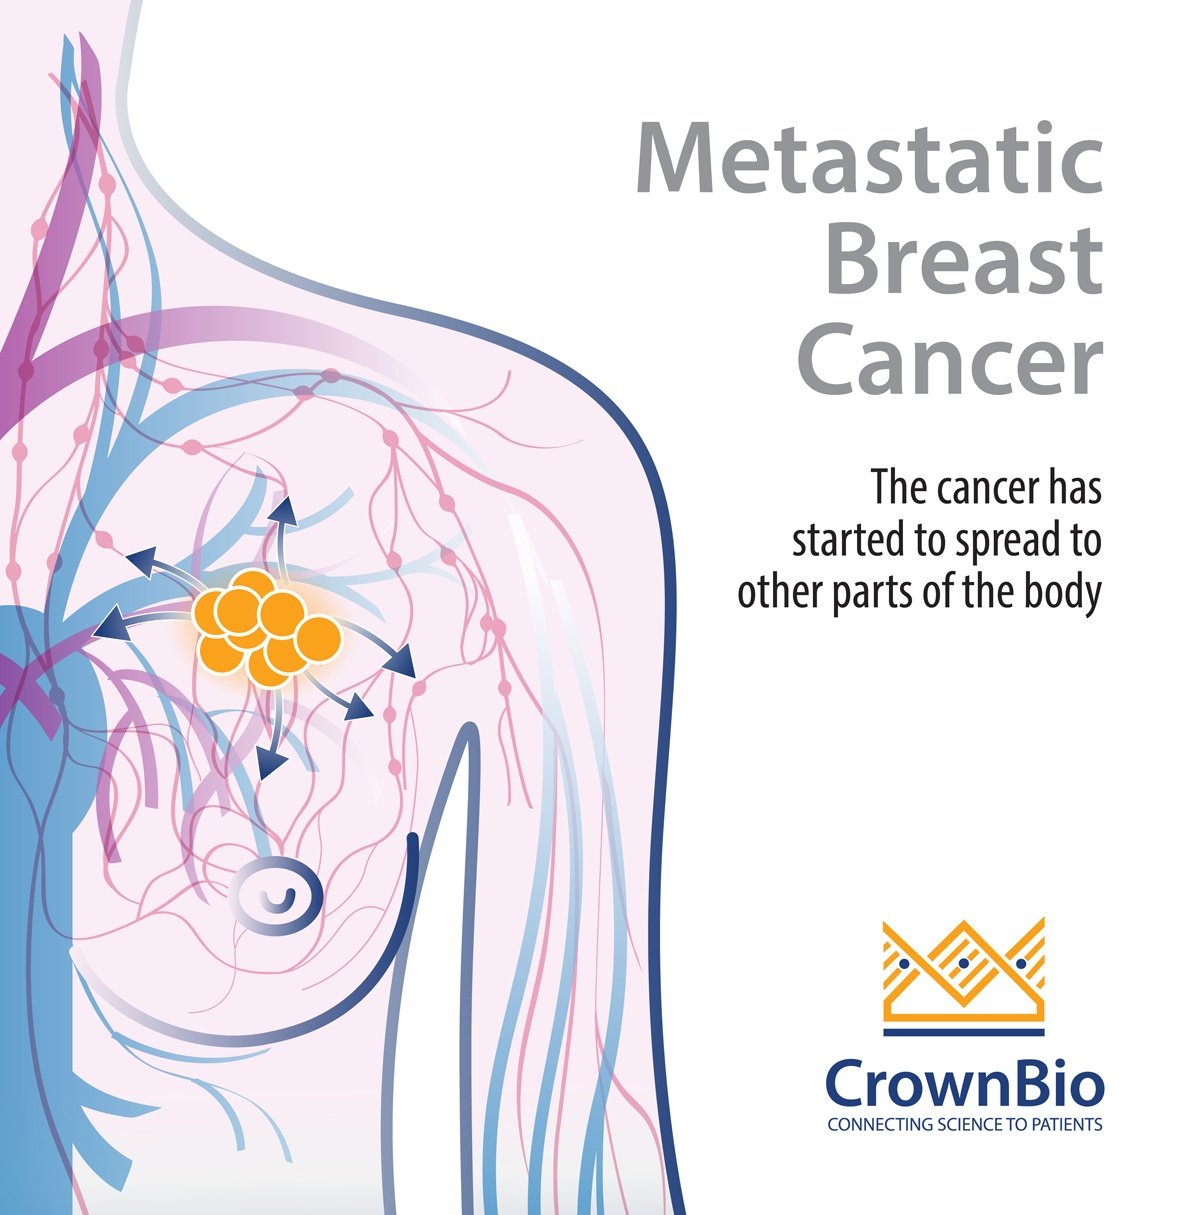 Why PDX Are Needed for Metastatic Breast Cancer Research